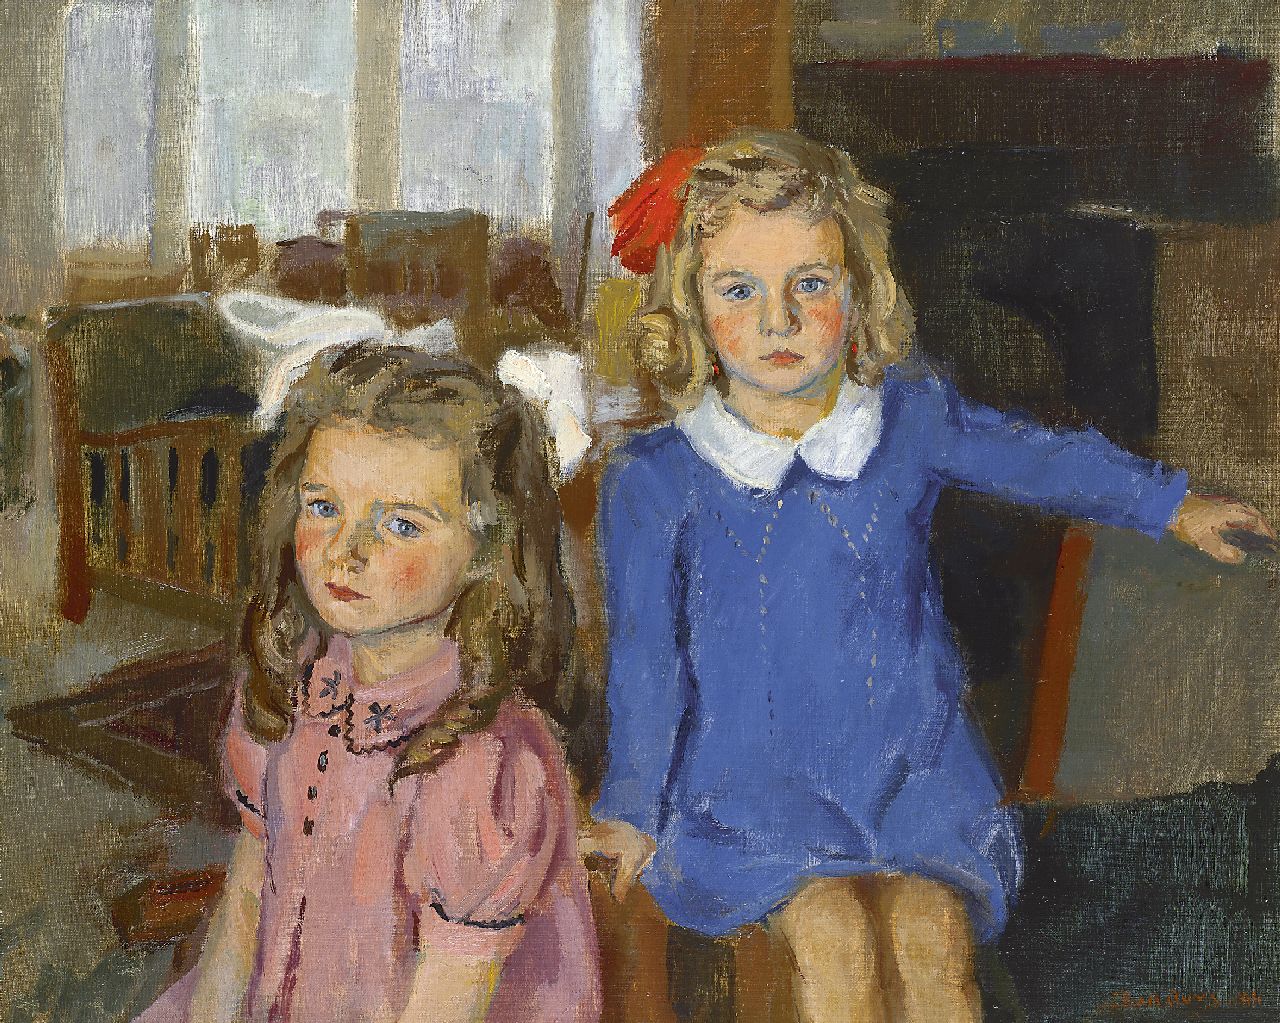 Buijs B.  | Barthold 'Bob' Buijs, Portrait of Hiske and Koosje Hin, oil on canvas 52.5 x 65.3 cm, signed l.r. and dated '44